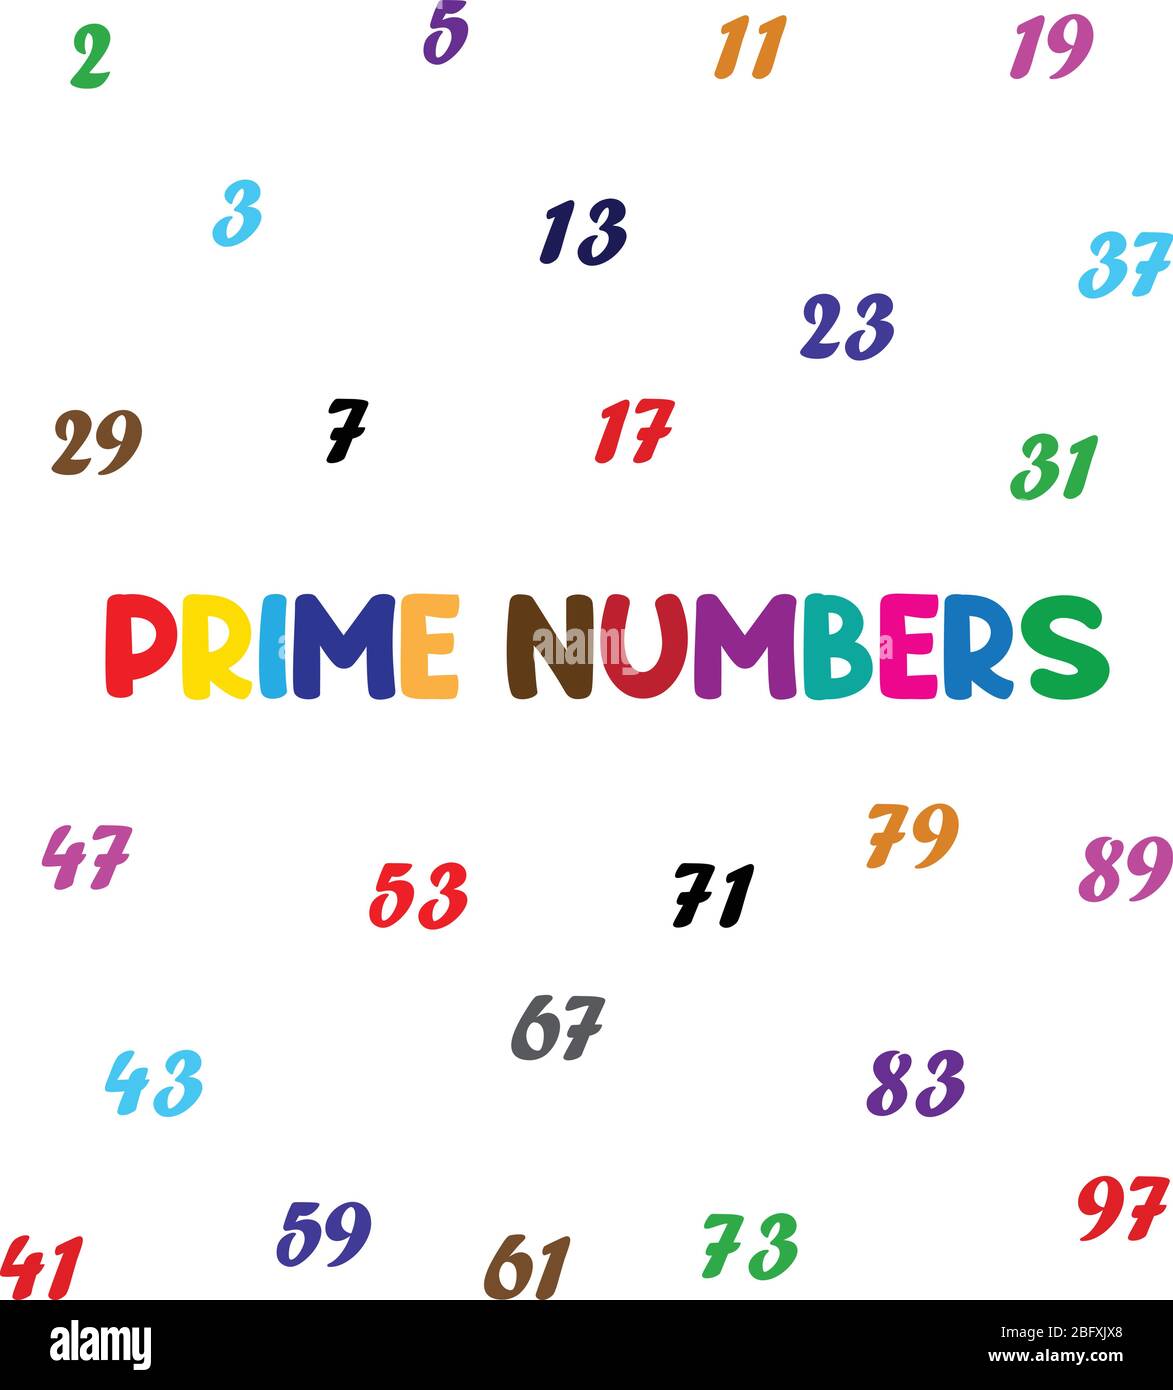 prime numbers between 1 and 100. Stock Vector